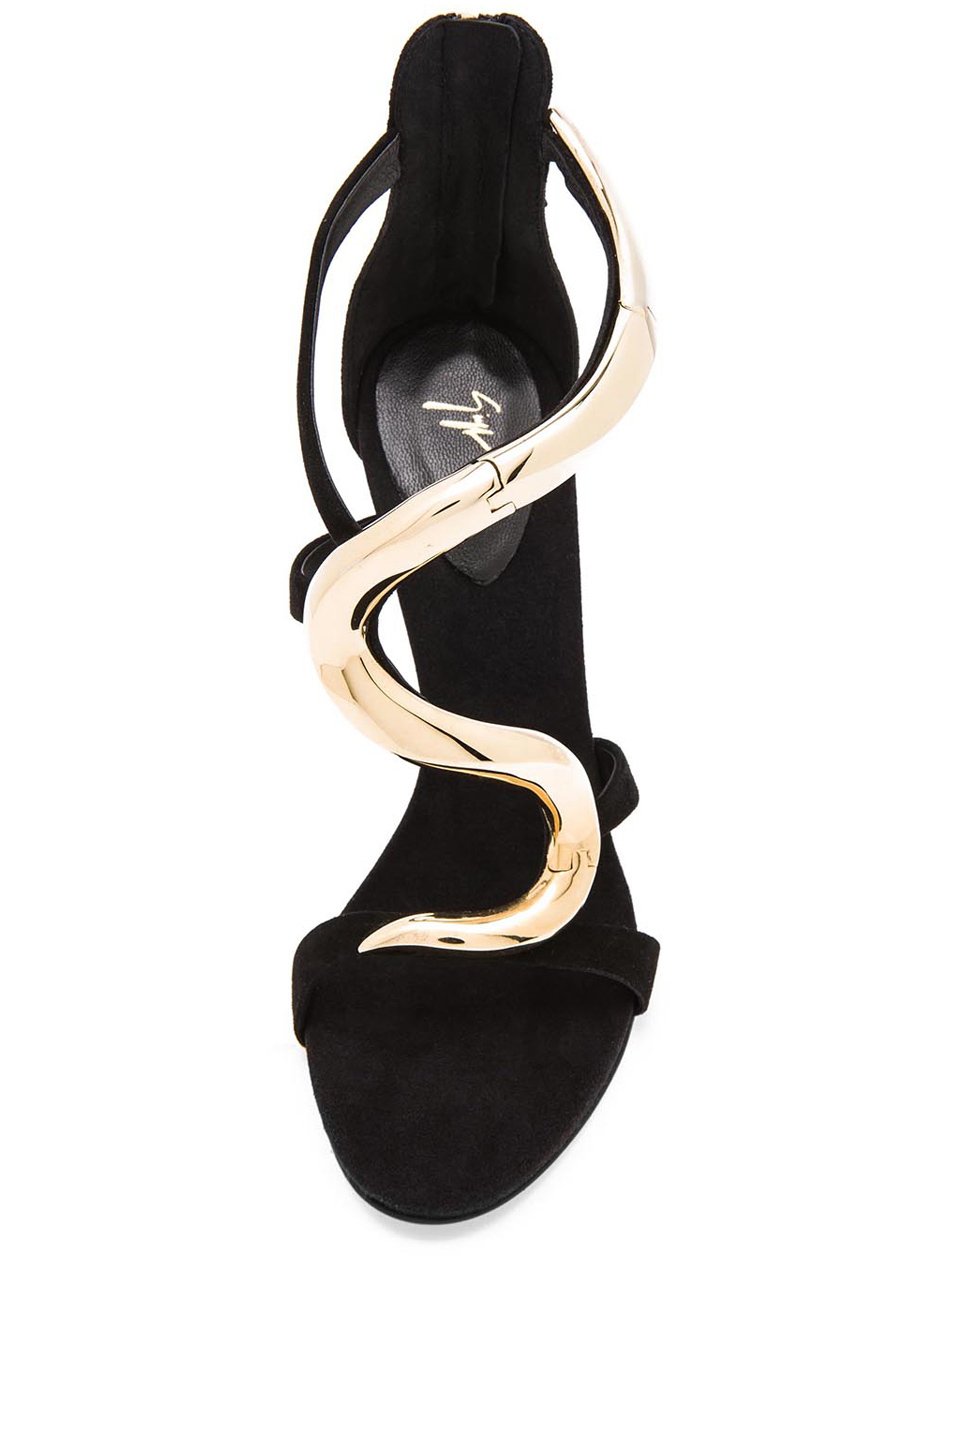 Womens Strappy Sandals In Black With Crystal And Snake Print Accents From  Yayatong0619, $78.23 | DHgate.Com